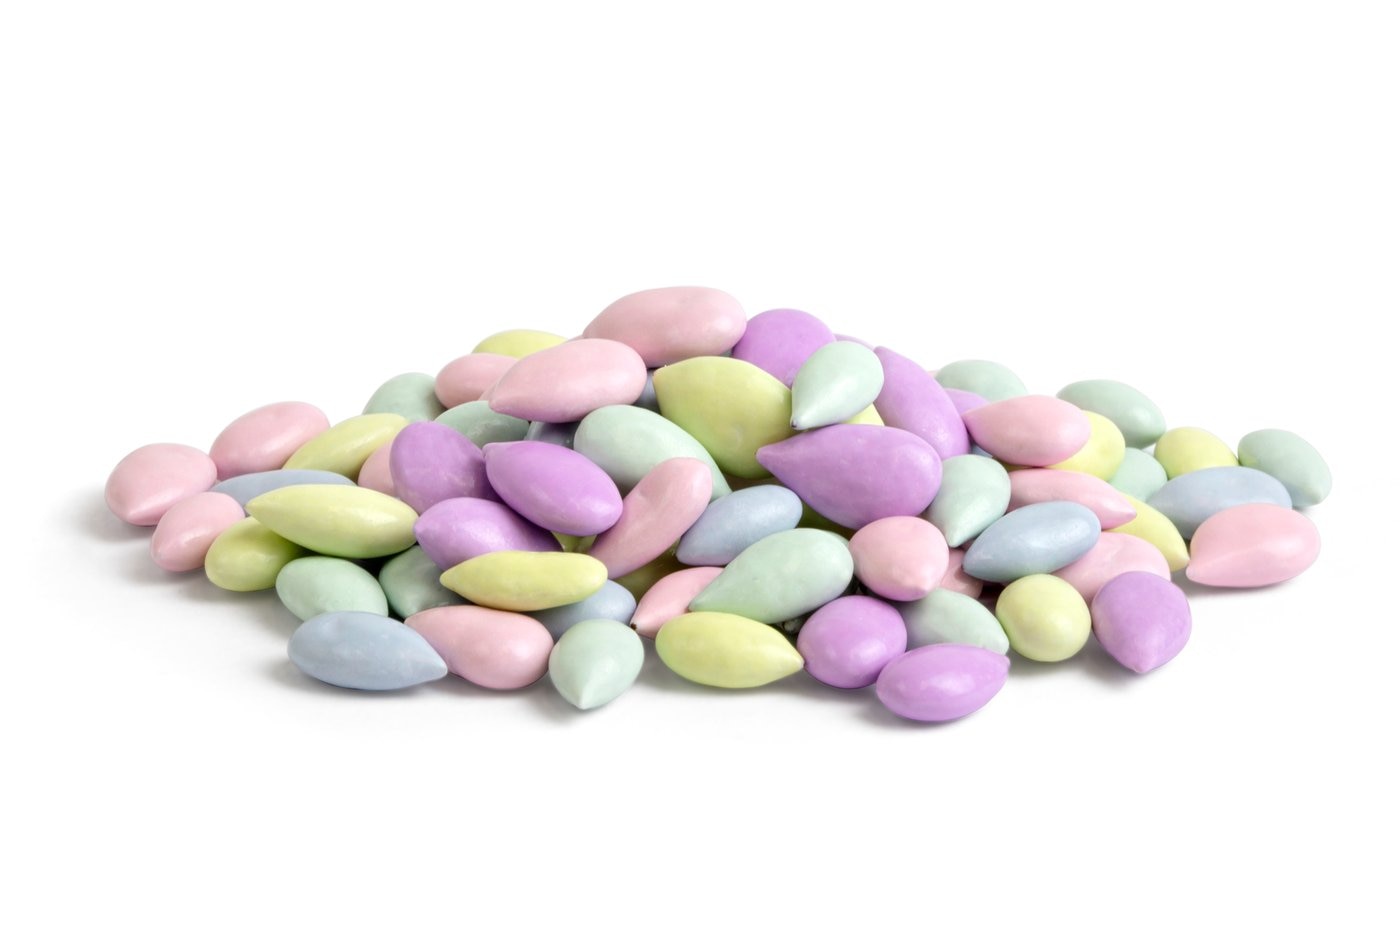 Chocolate Covered Sunflower Seeds (Pastel Mix) photo